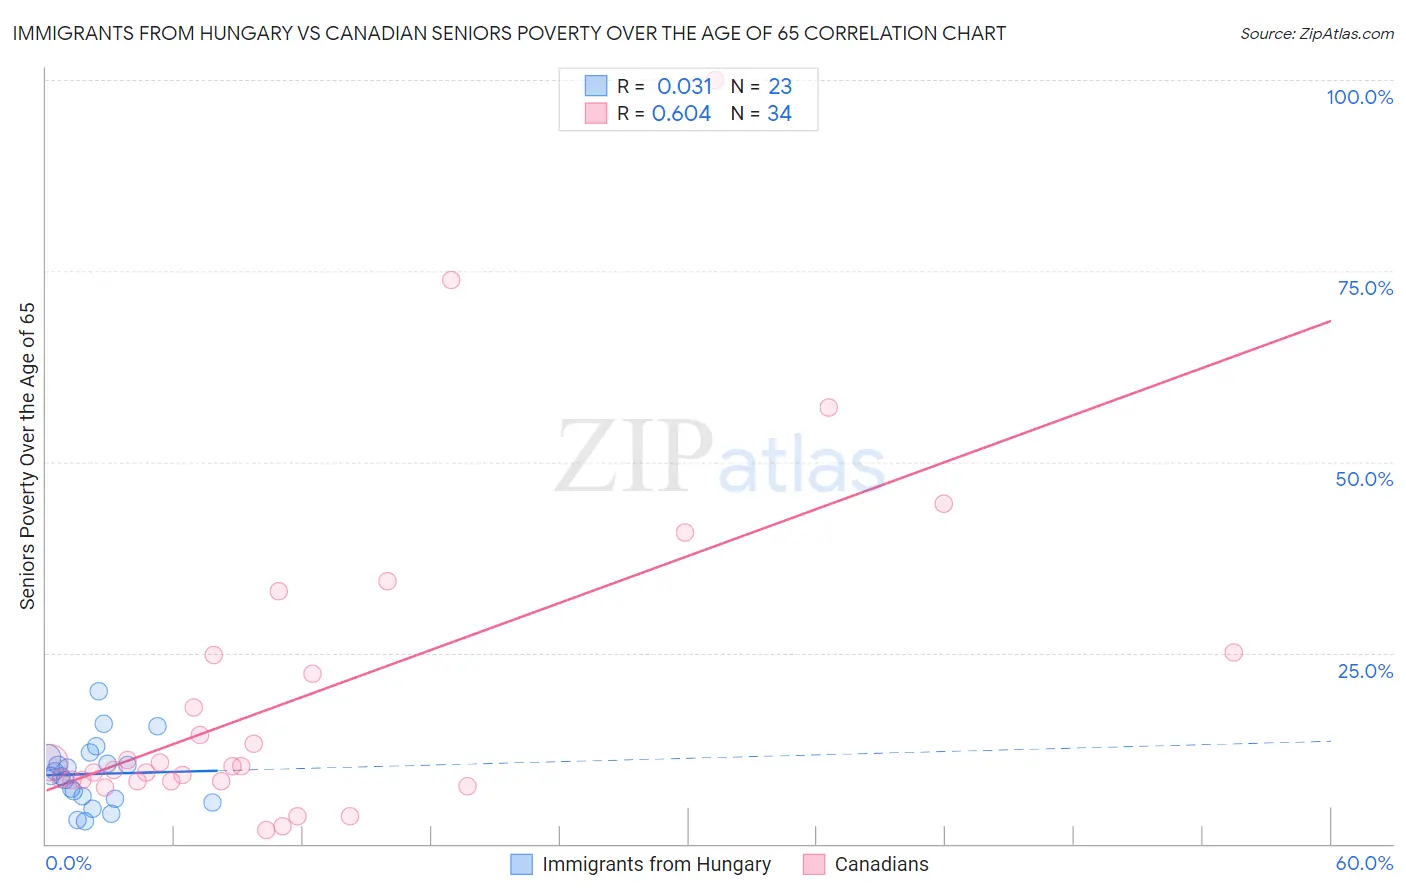 Immigrants from Hungary vs Canadian Seniors Poverty Over the Age of 65